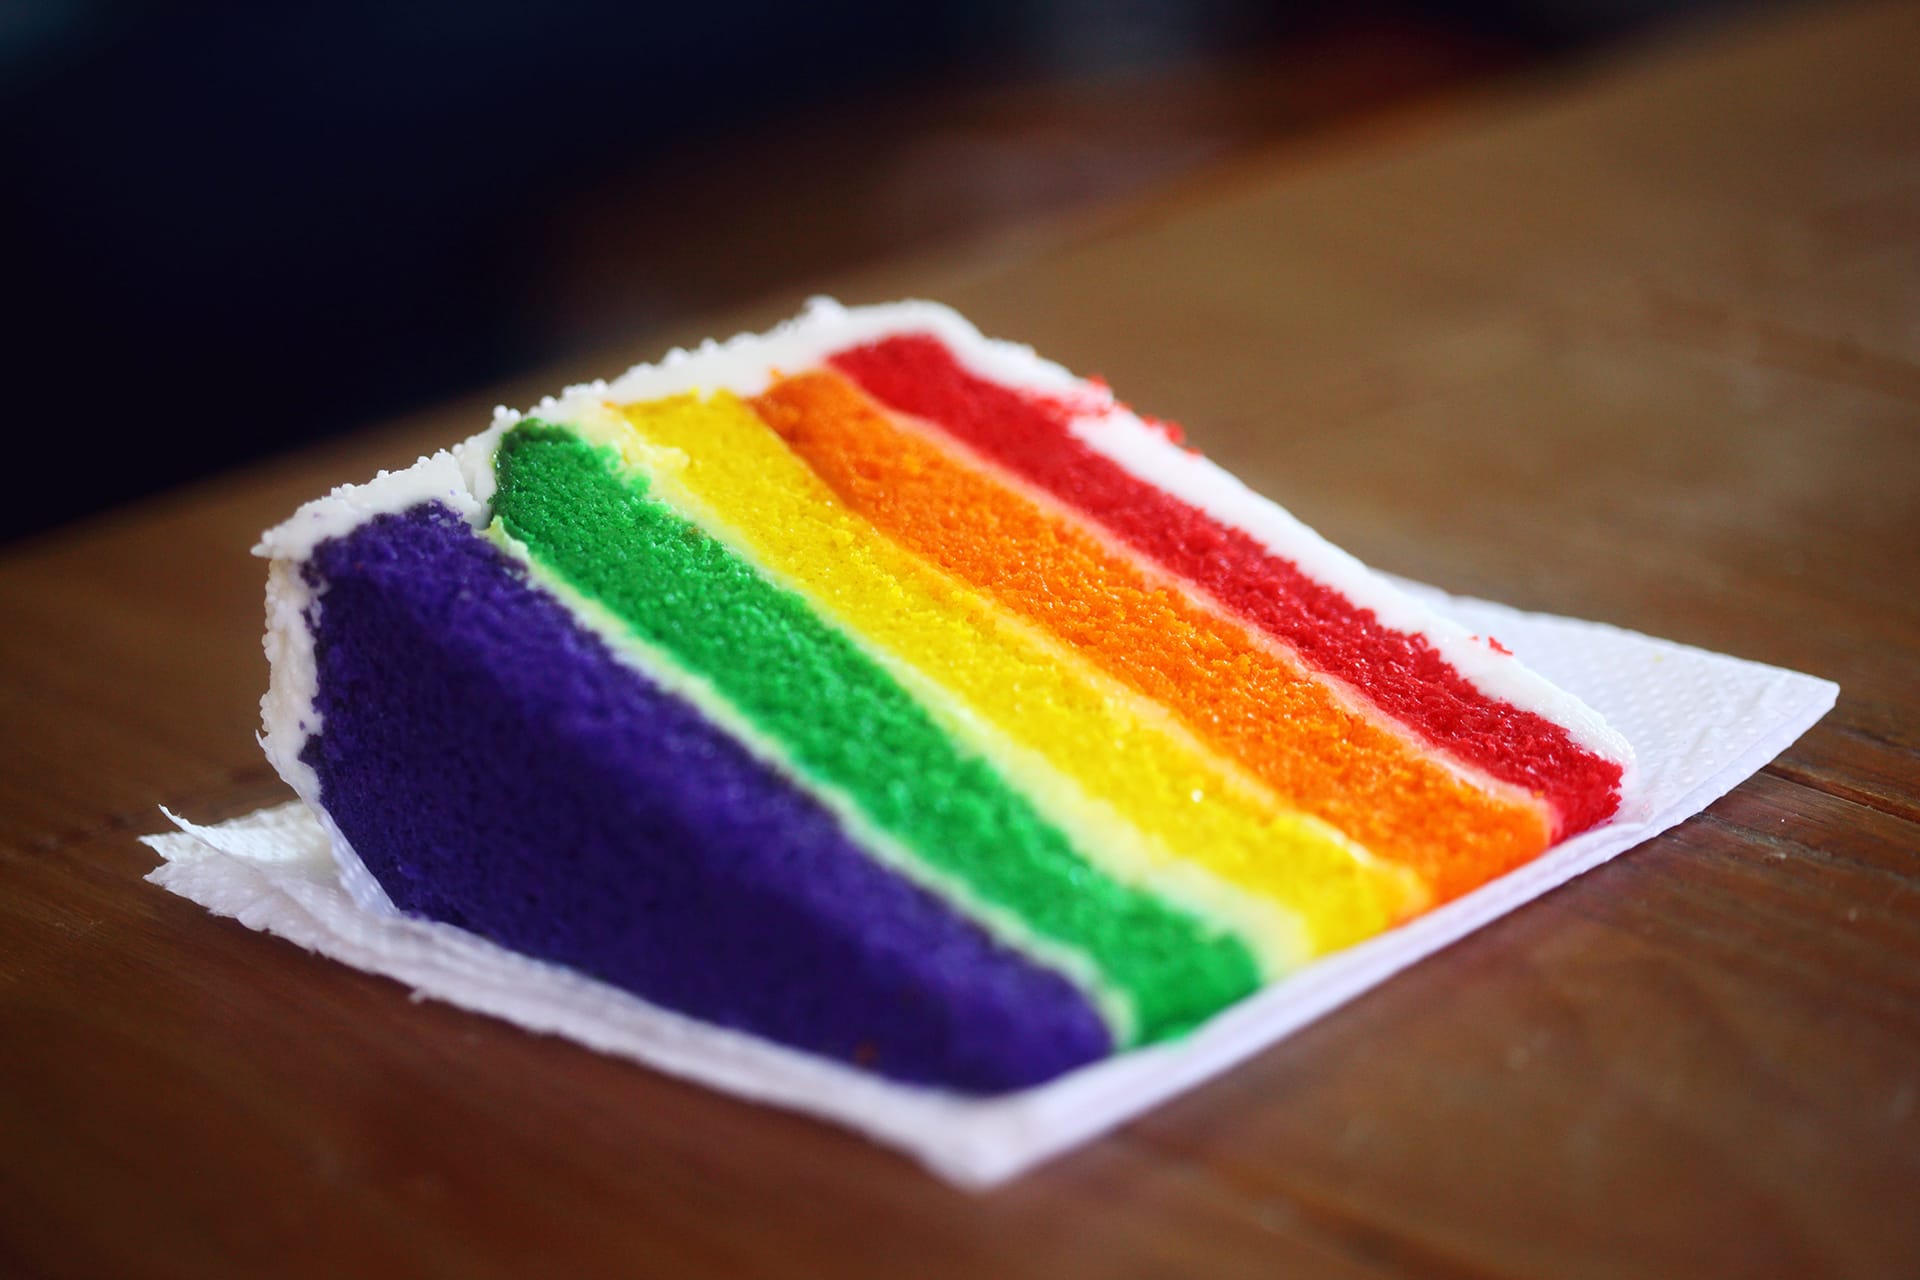 Put your Wilfa stand-mixer to the test with a pride flag layered cake